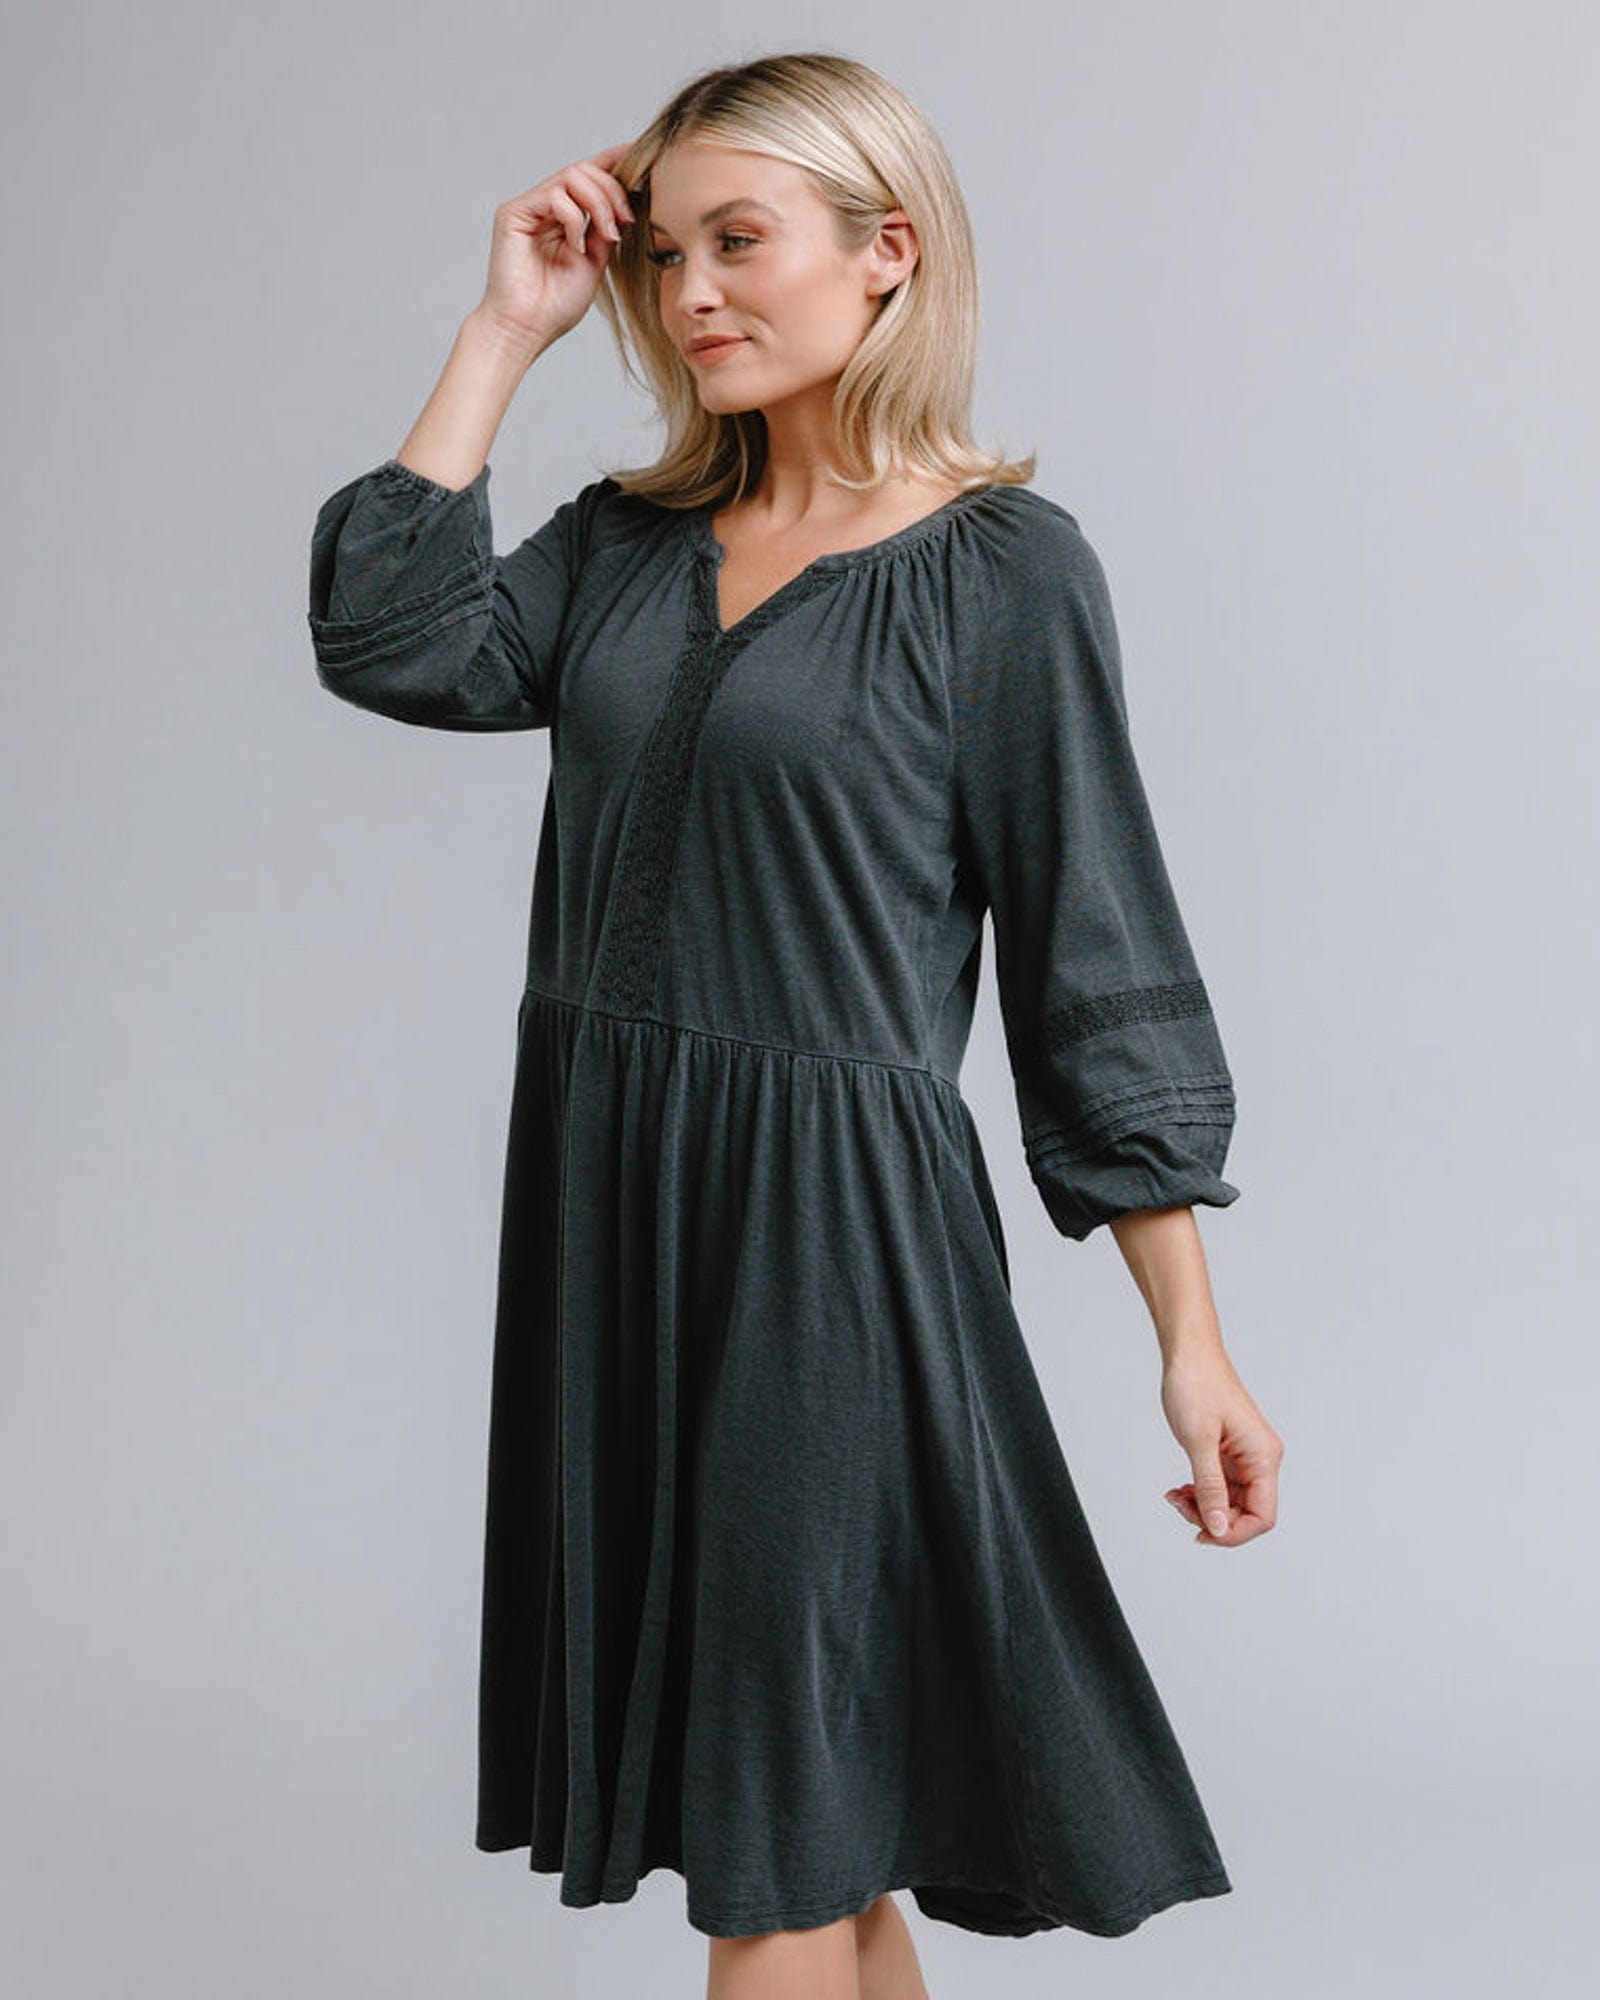 Woman in a 3/4 sleeve, knee-length, gray dress with lace detail around neckline